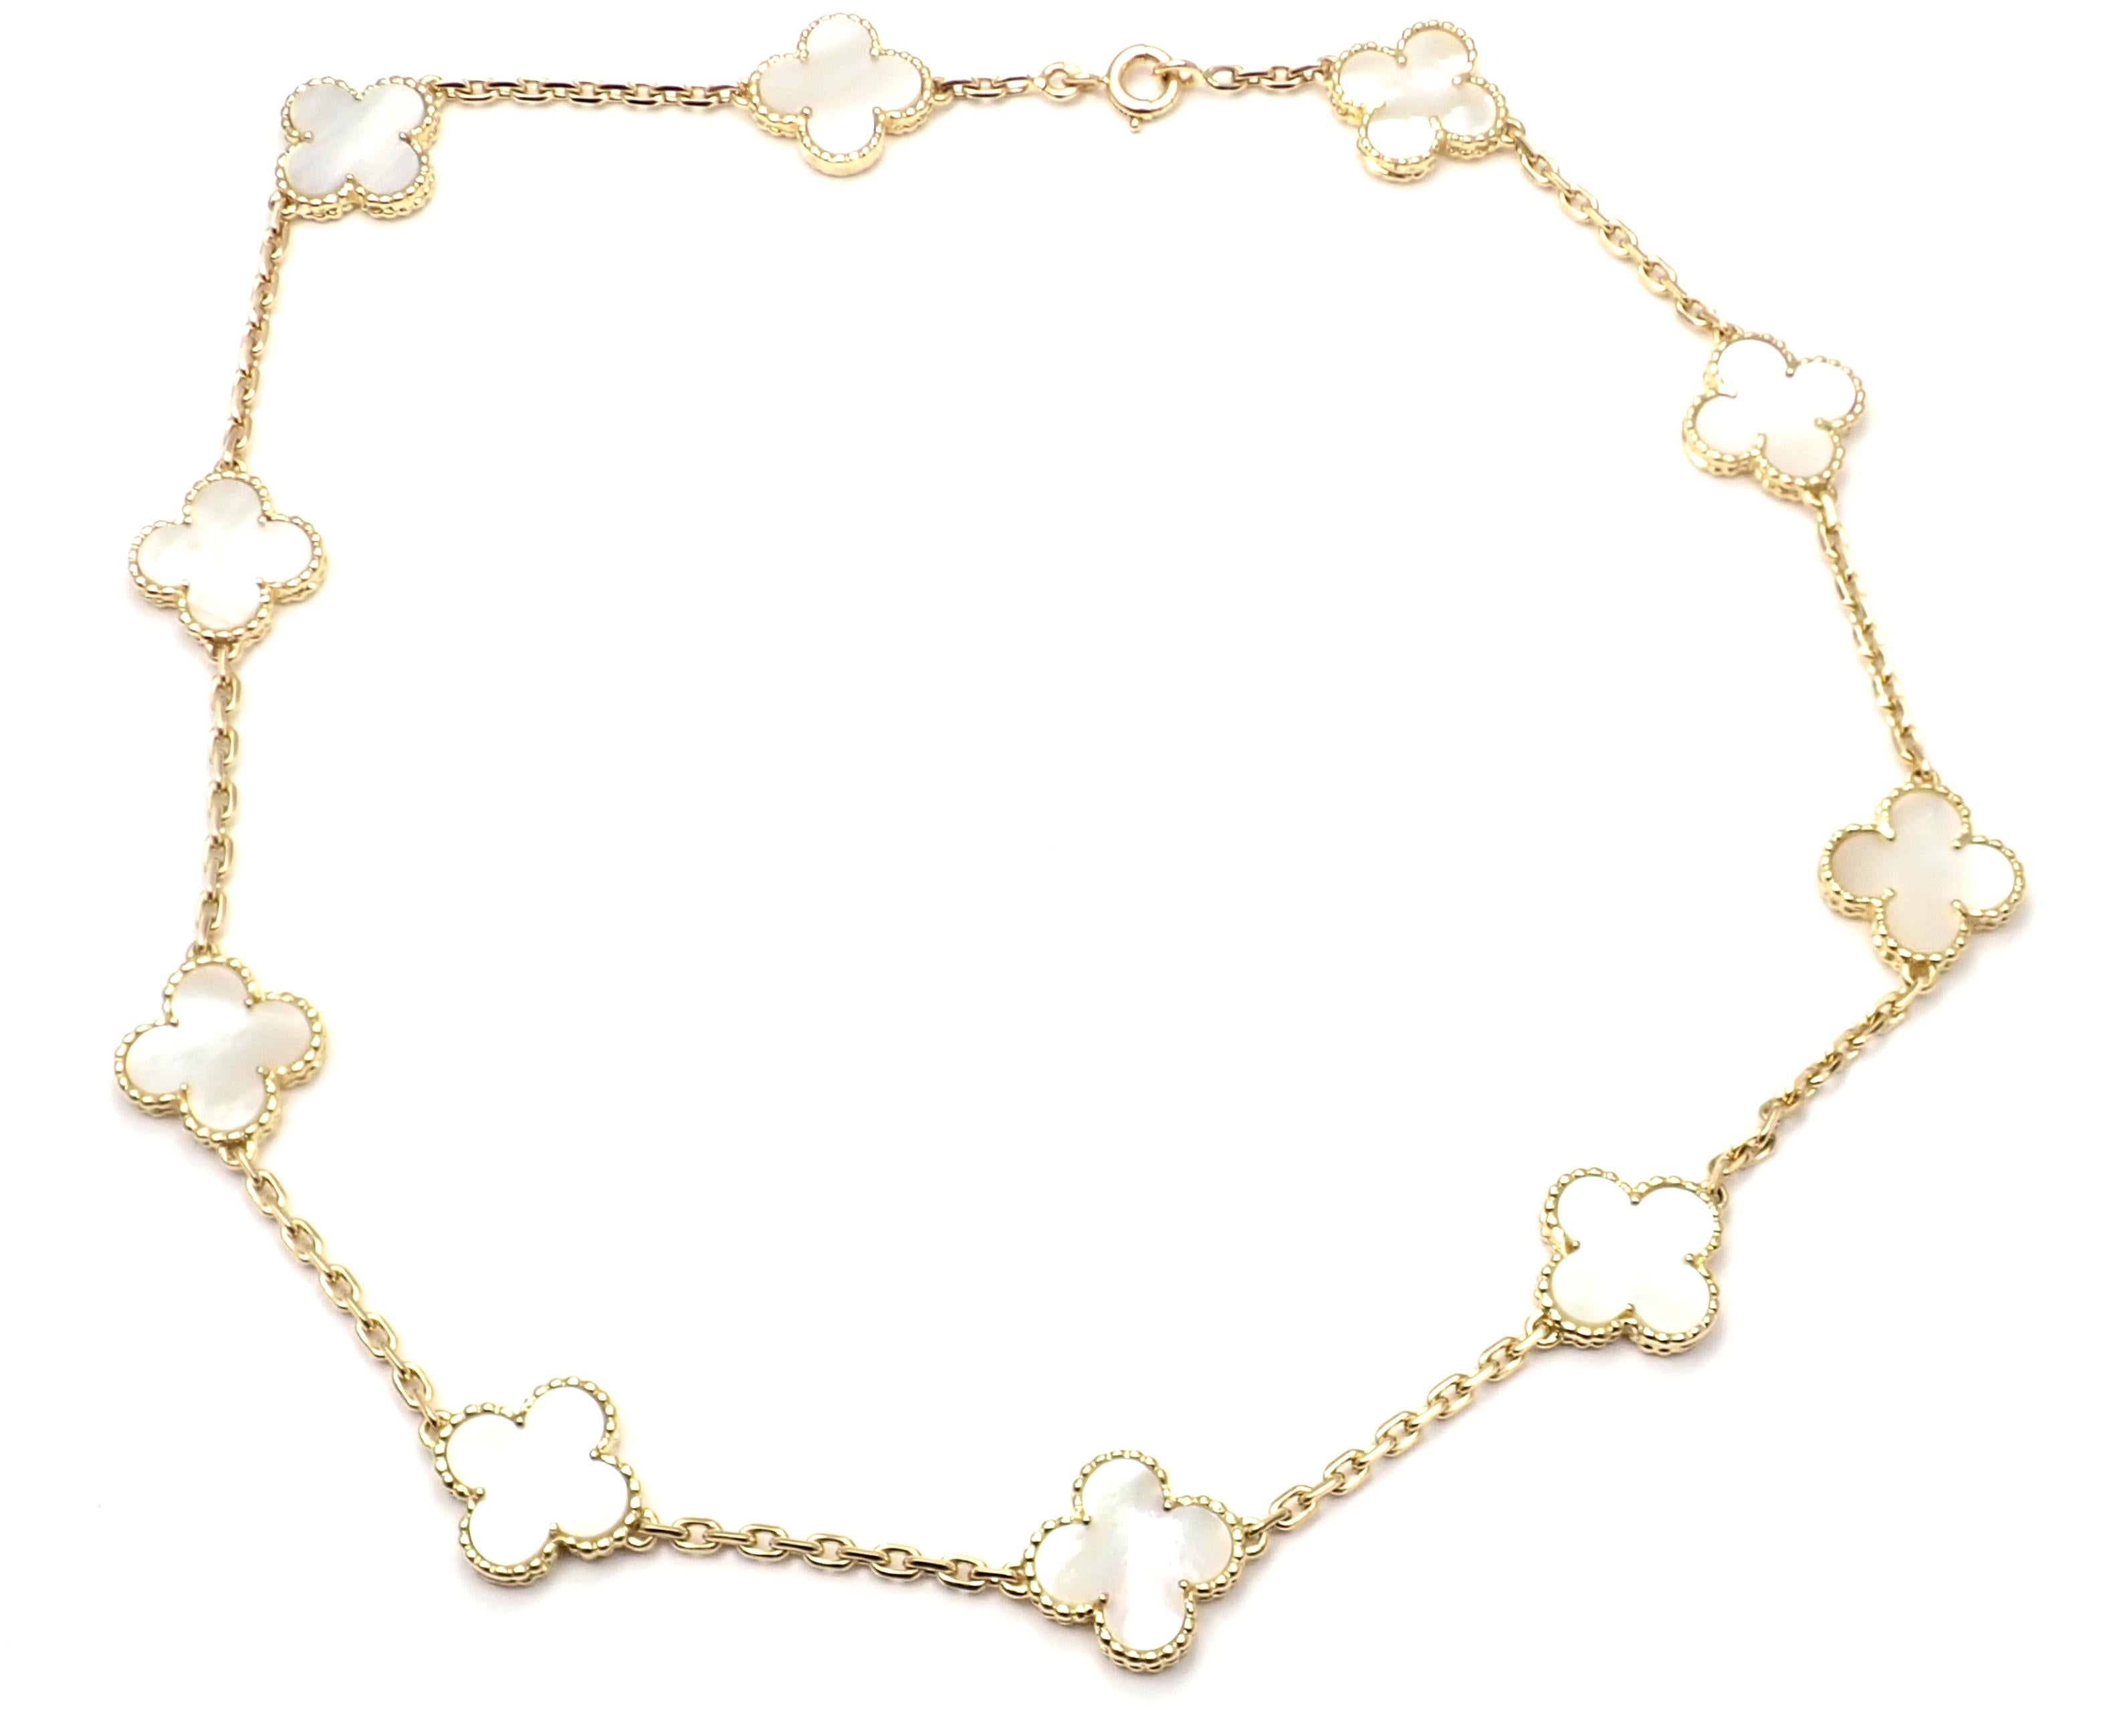 18k Yellow Gold Alhambra 10 Motifs Mother Of Pearl Necklace by Van Cleef & Arpels. 
With 10 motifs of mother of pearl Alhambra stones 15mm each 
This necklace comes with service paper from Van Cleef & Arpels store.
Details: 
Length: 16''
Width: 15mm